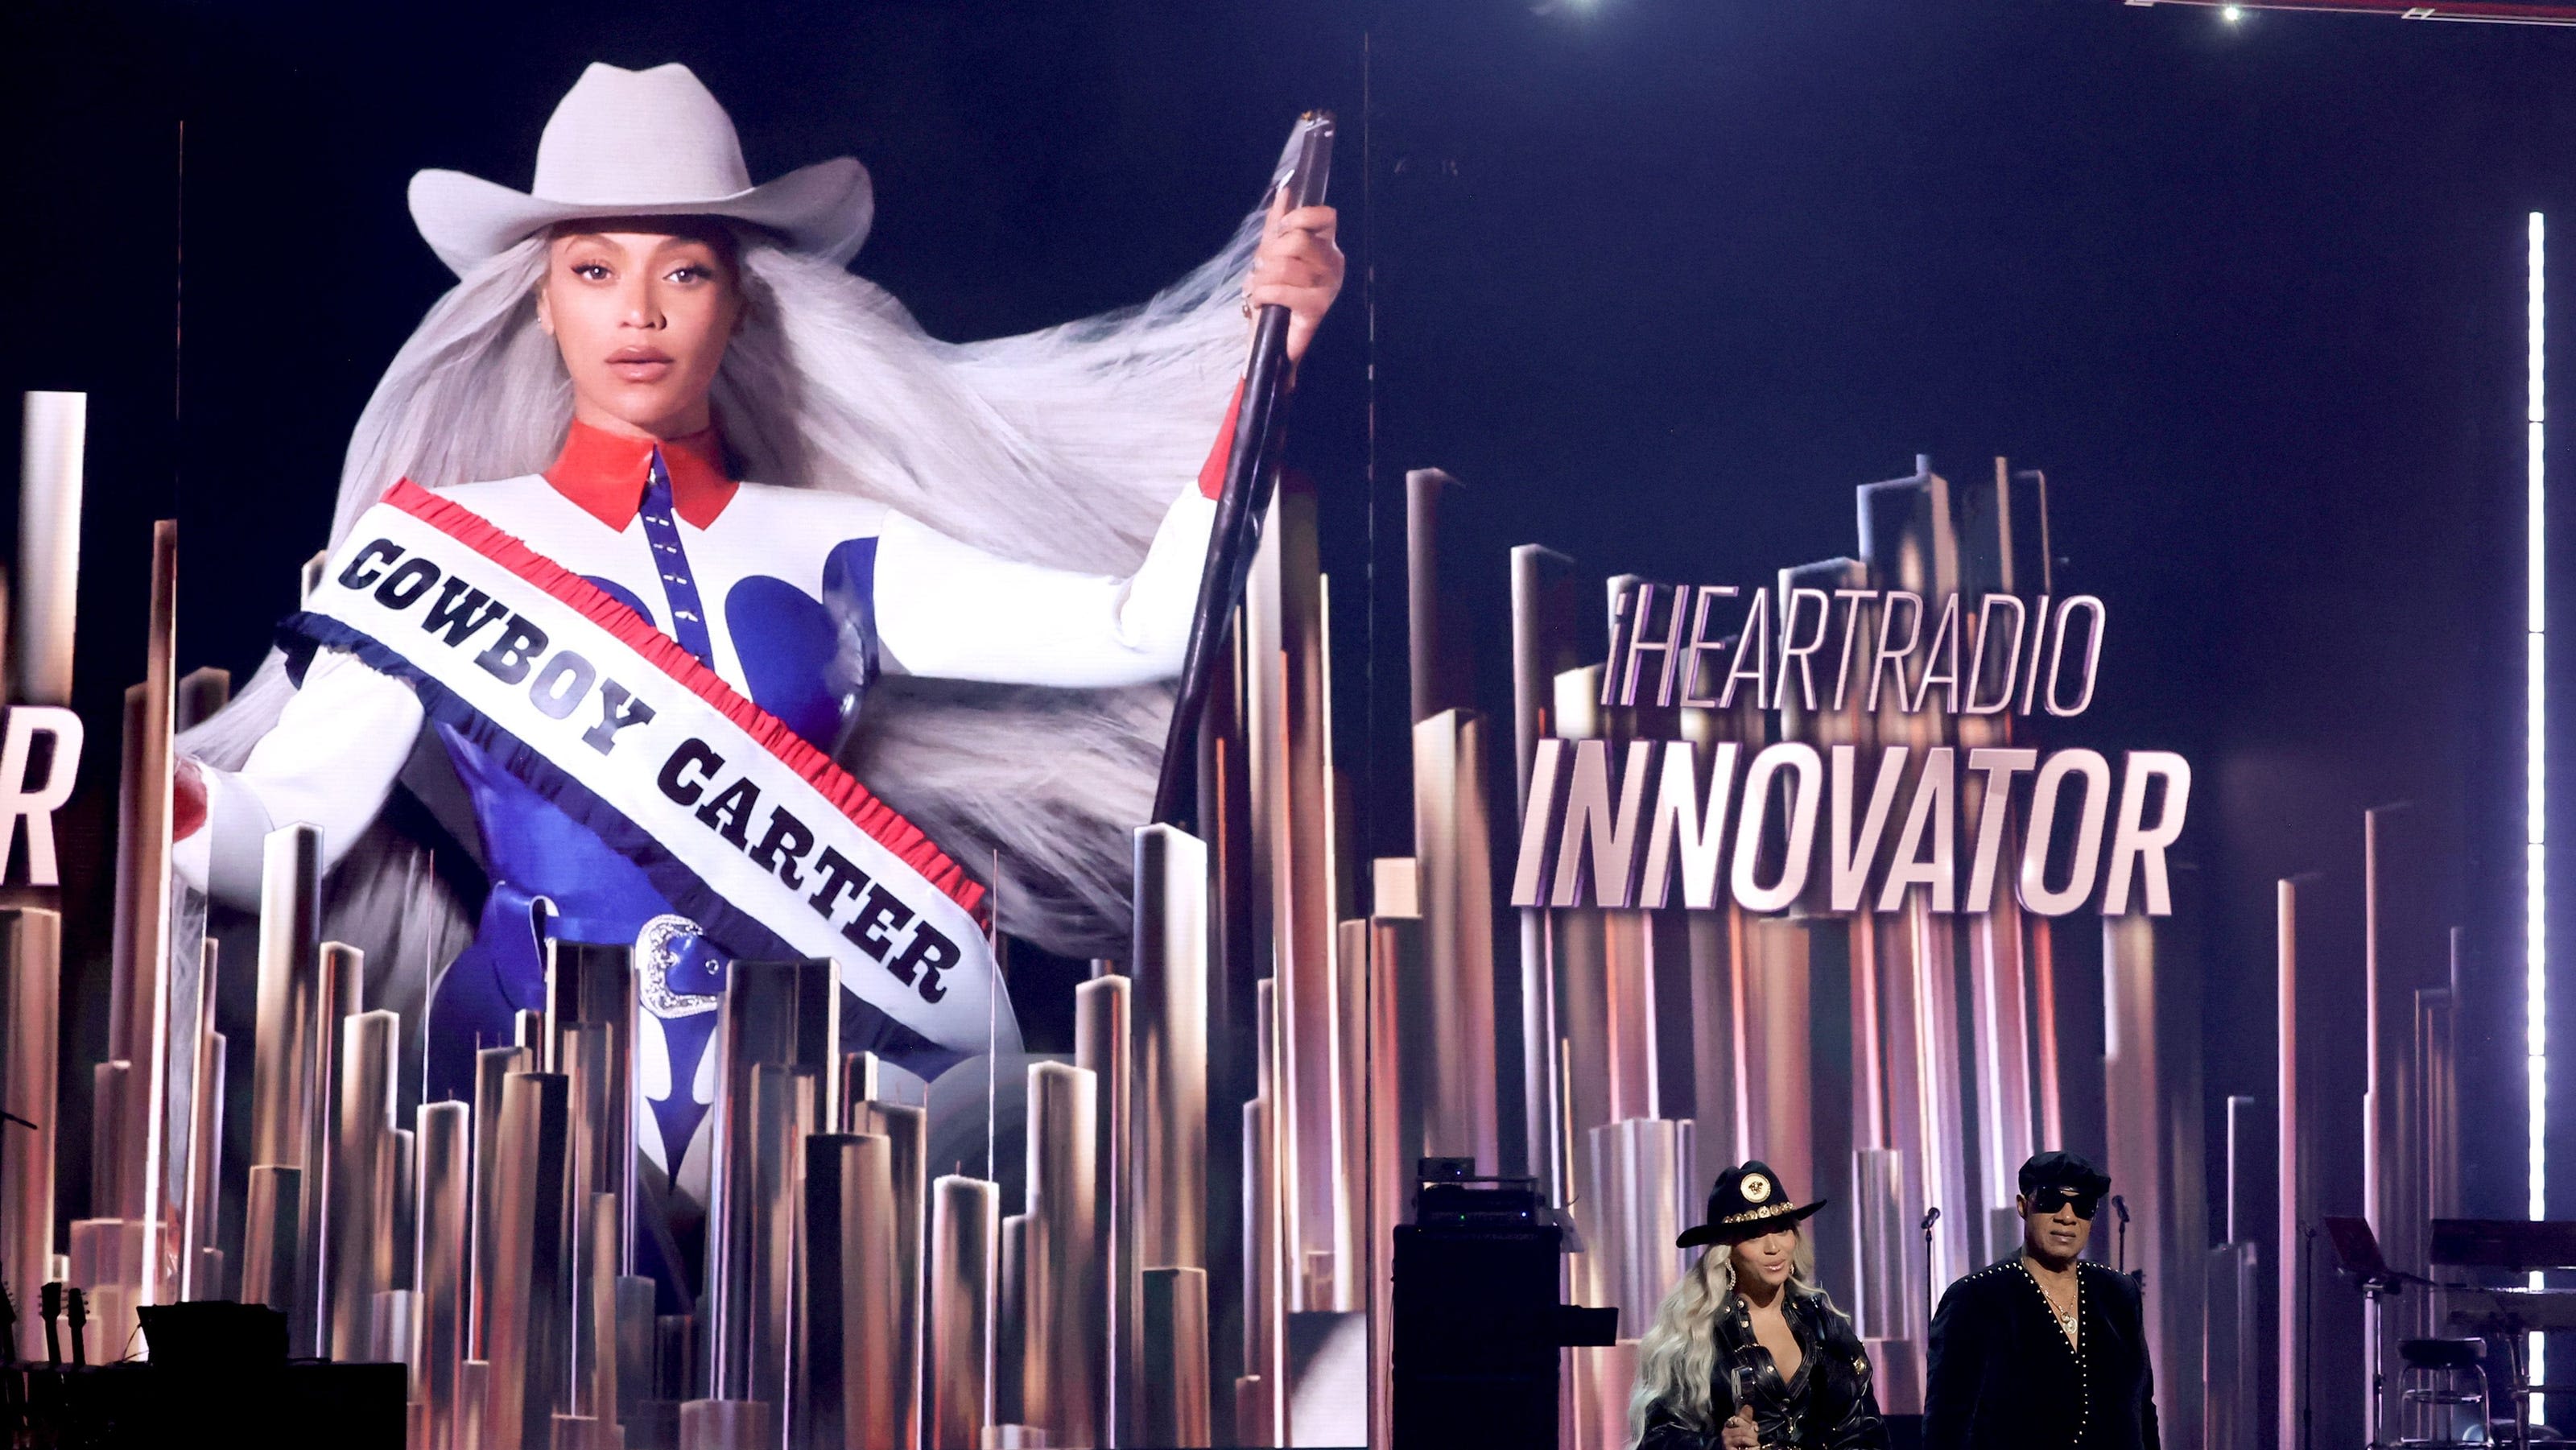 Beyonce brings "Cowboy Carter" vibes to Team USA Paris Olympics intro for NBC